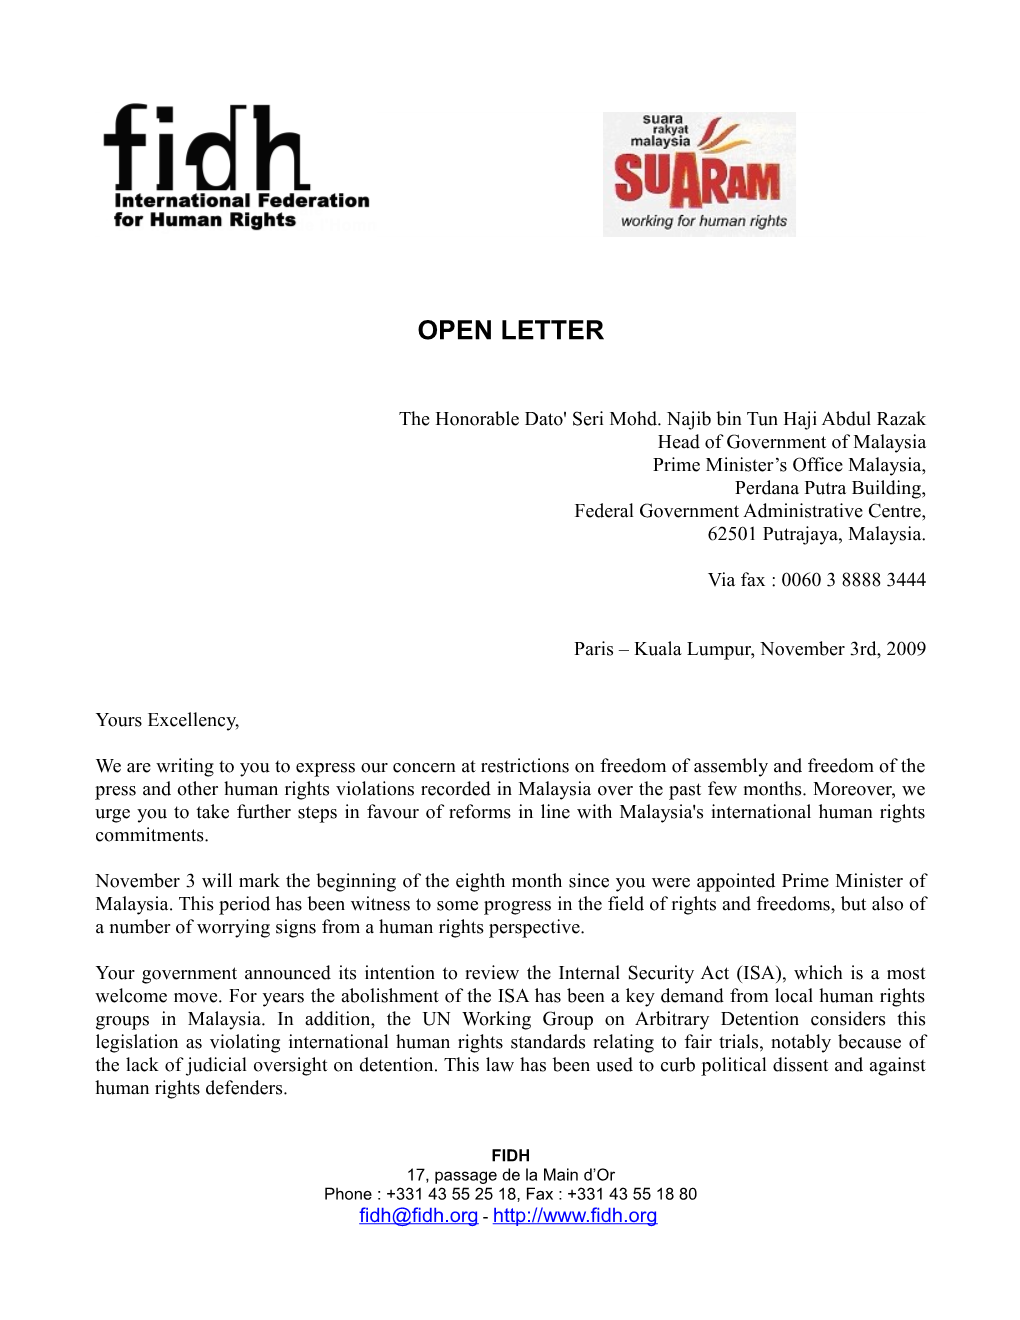 Open Letter to the Prime Minister of Malaysia